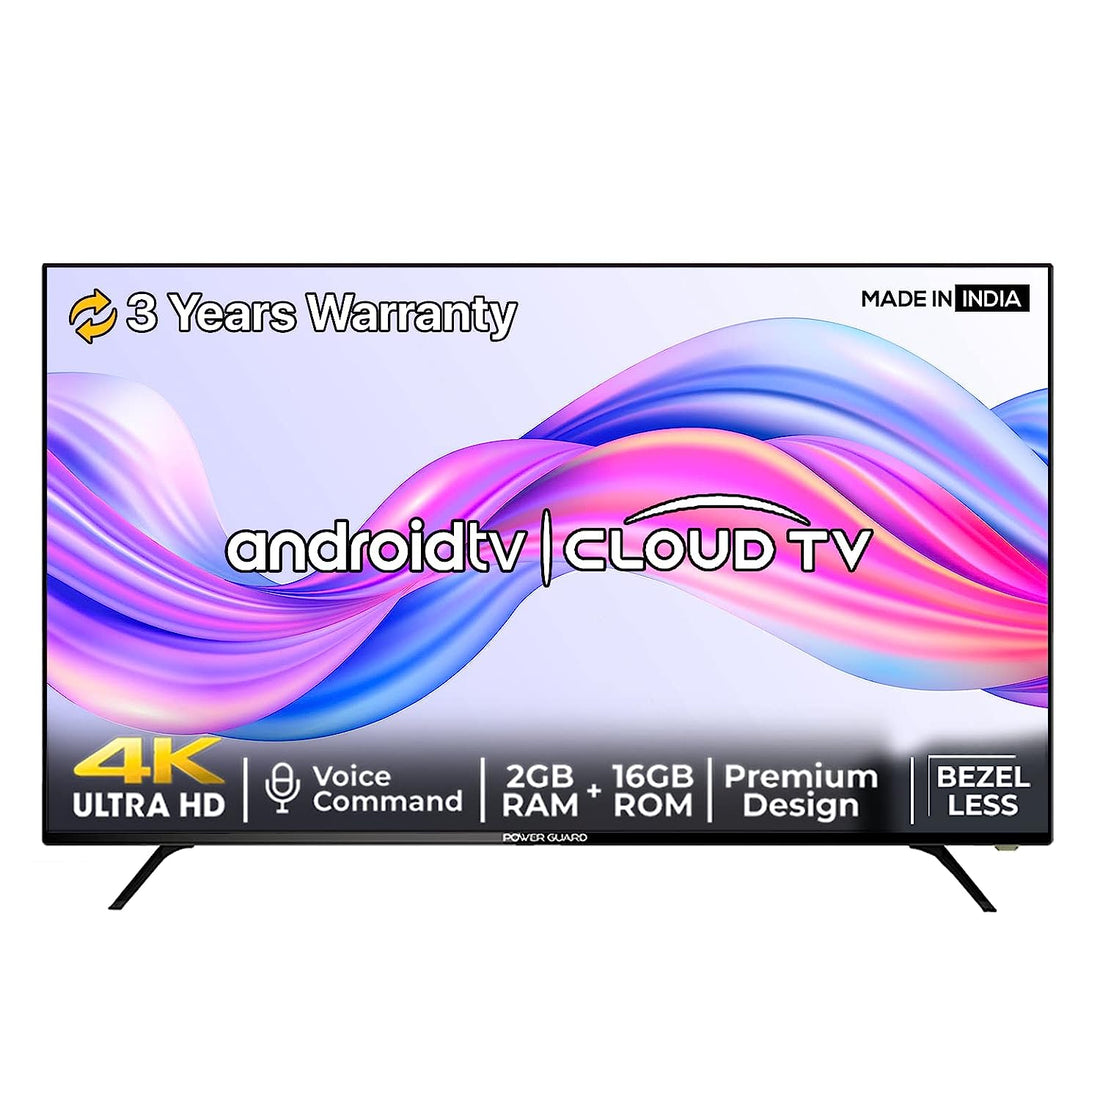 Shop for the Best Deals on 55 Inch LED TV Lowest Price Online 